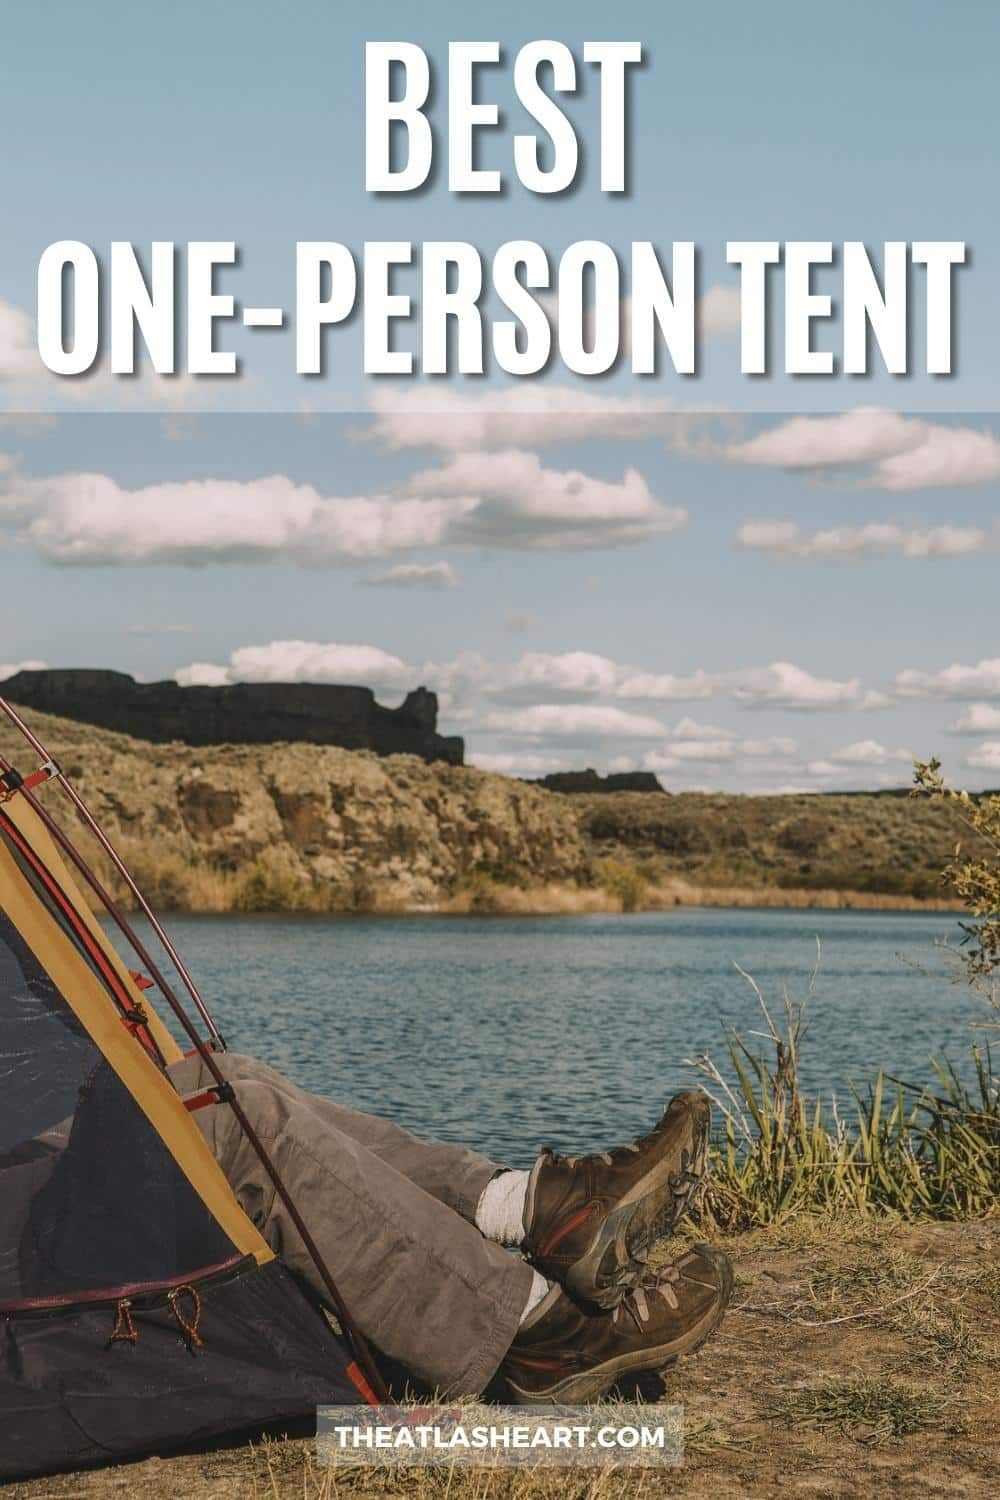 13 Best One-Person Tents for Backpacking [Top Solo Tents]